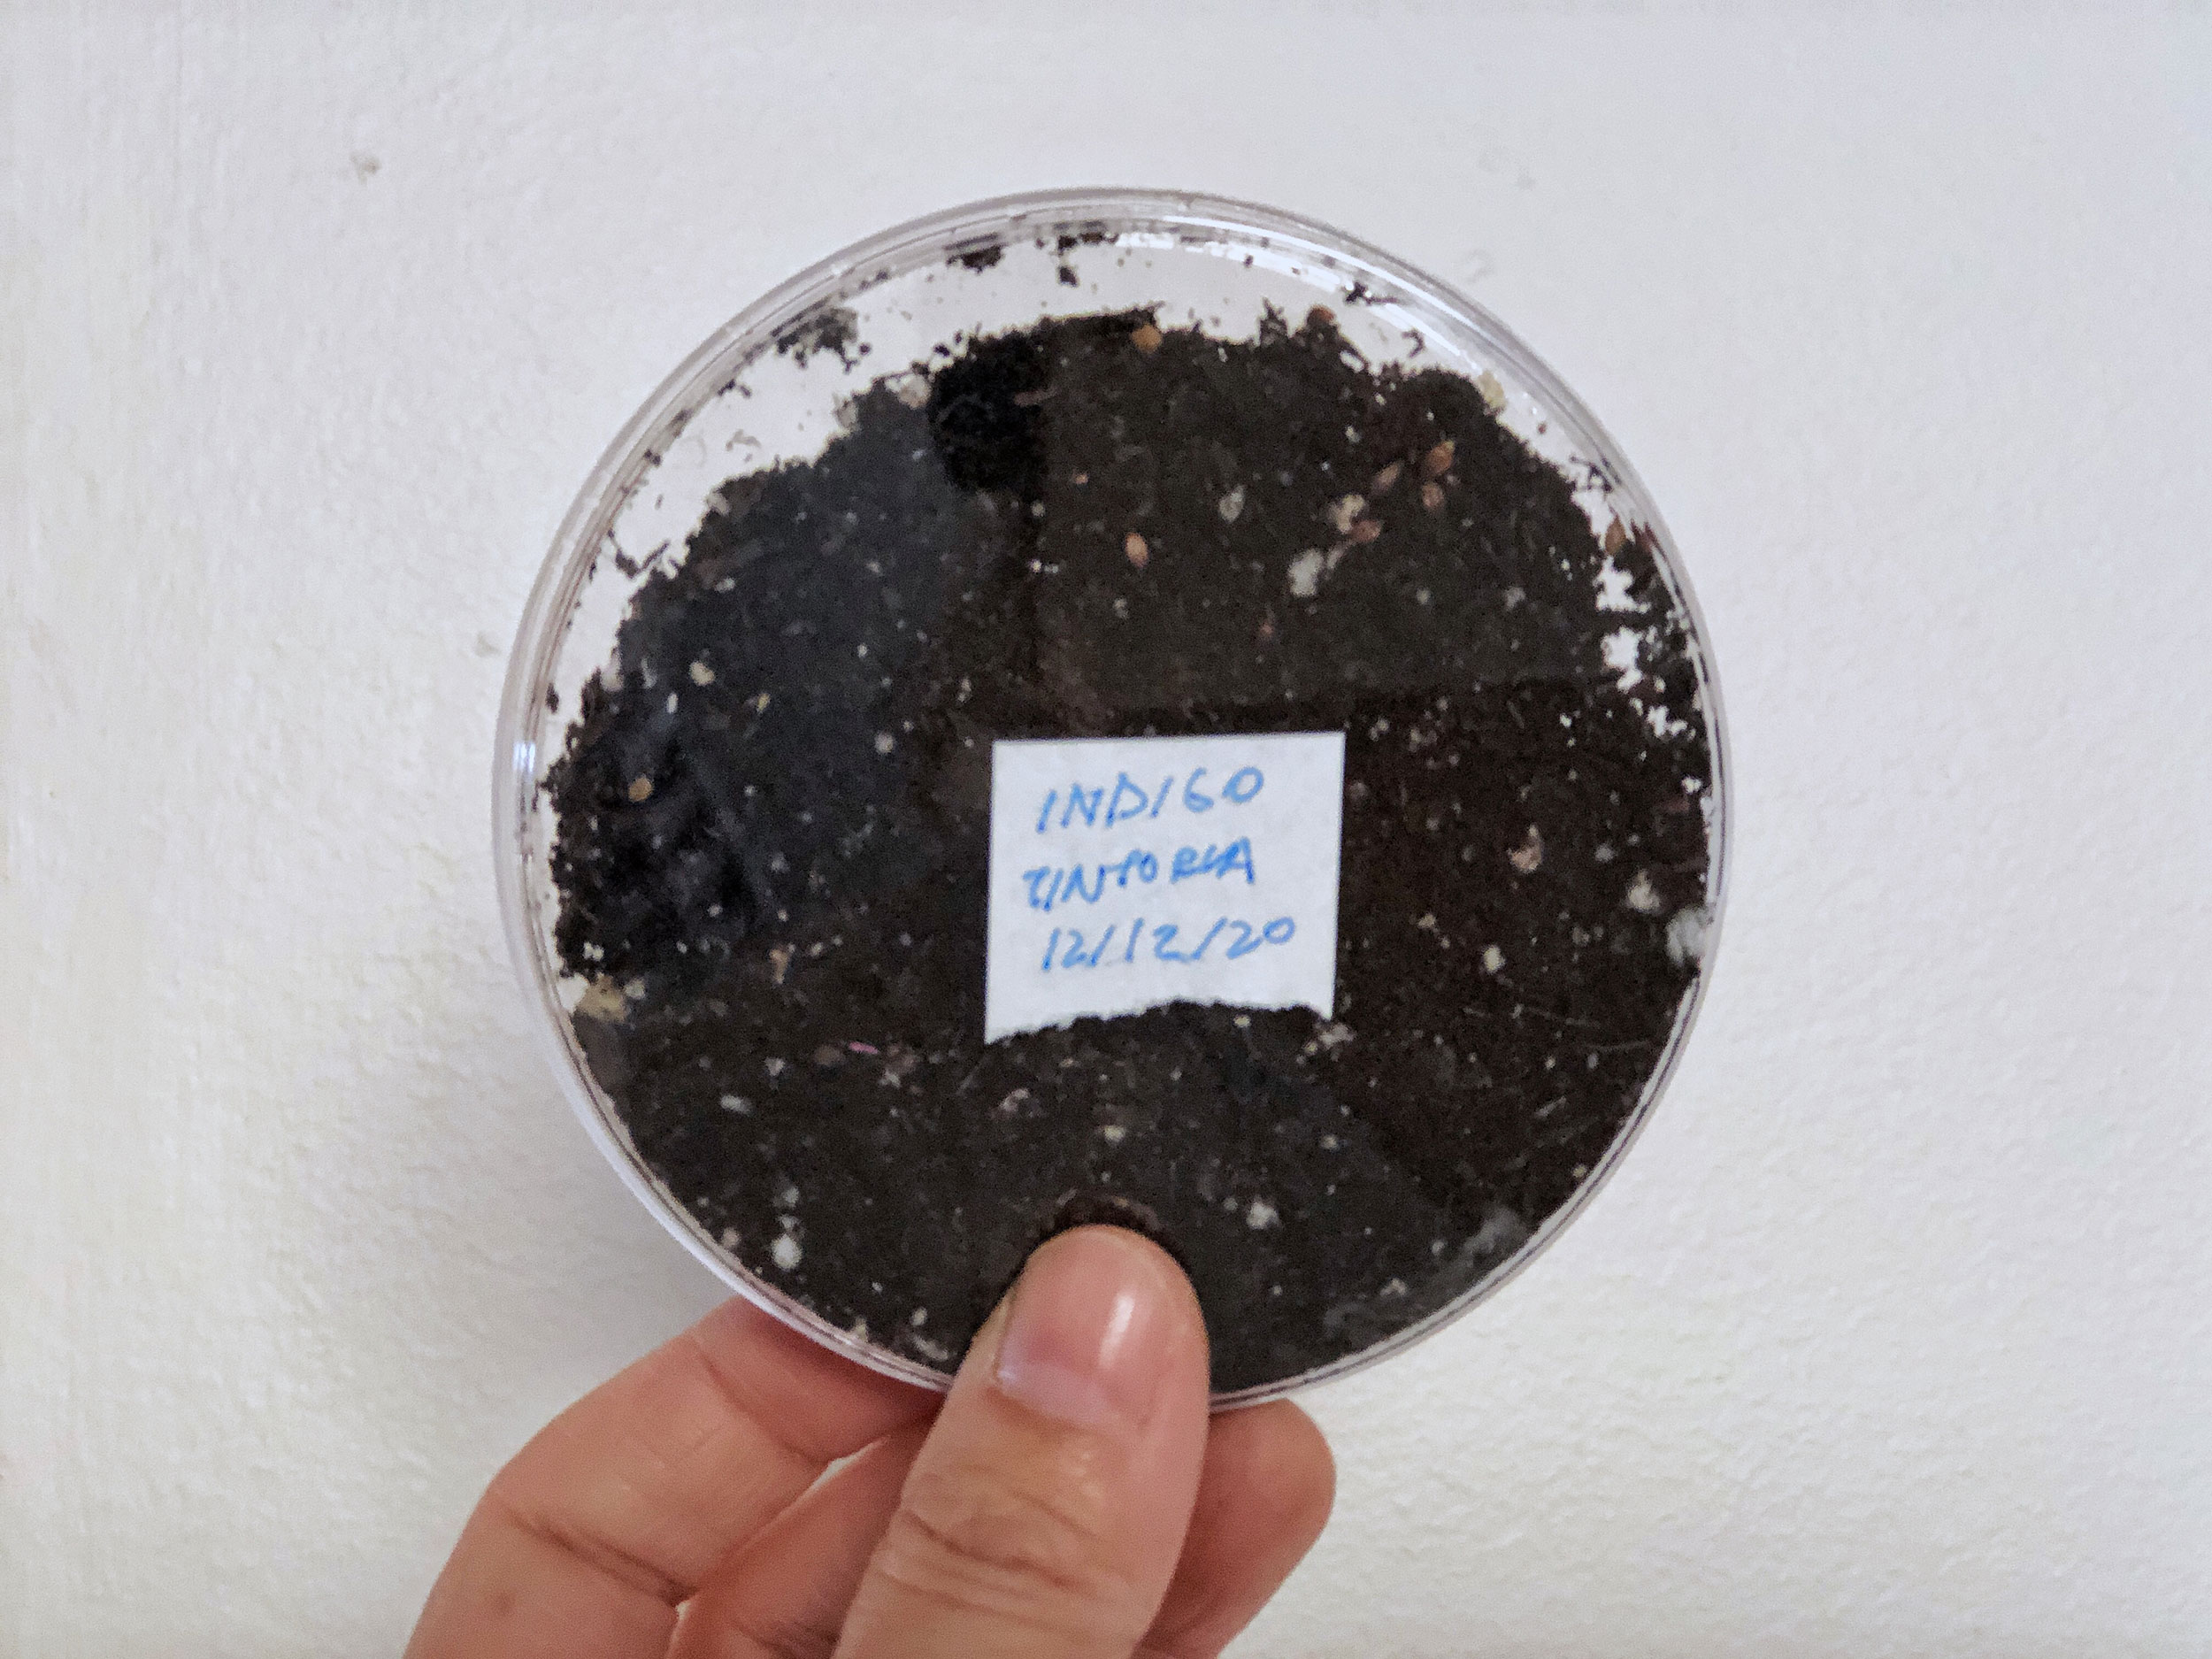 A petri dish of dirt with a label that reads “Indigo Tintoria 12/12/20”